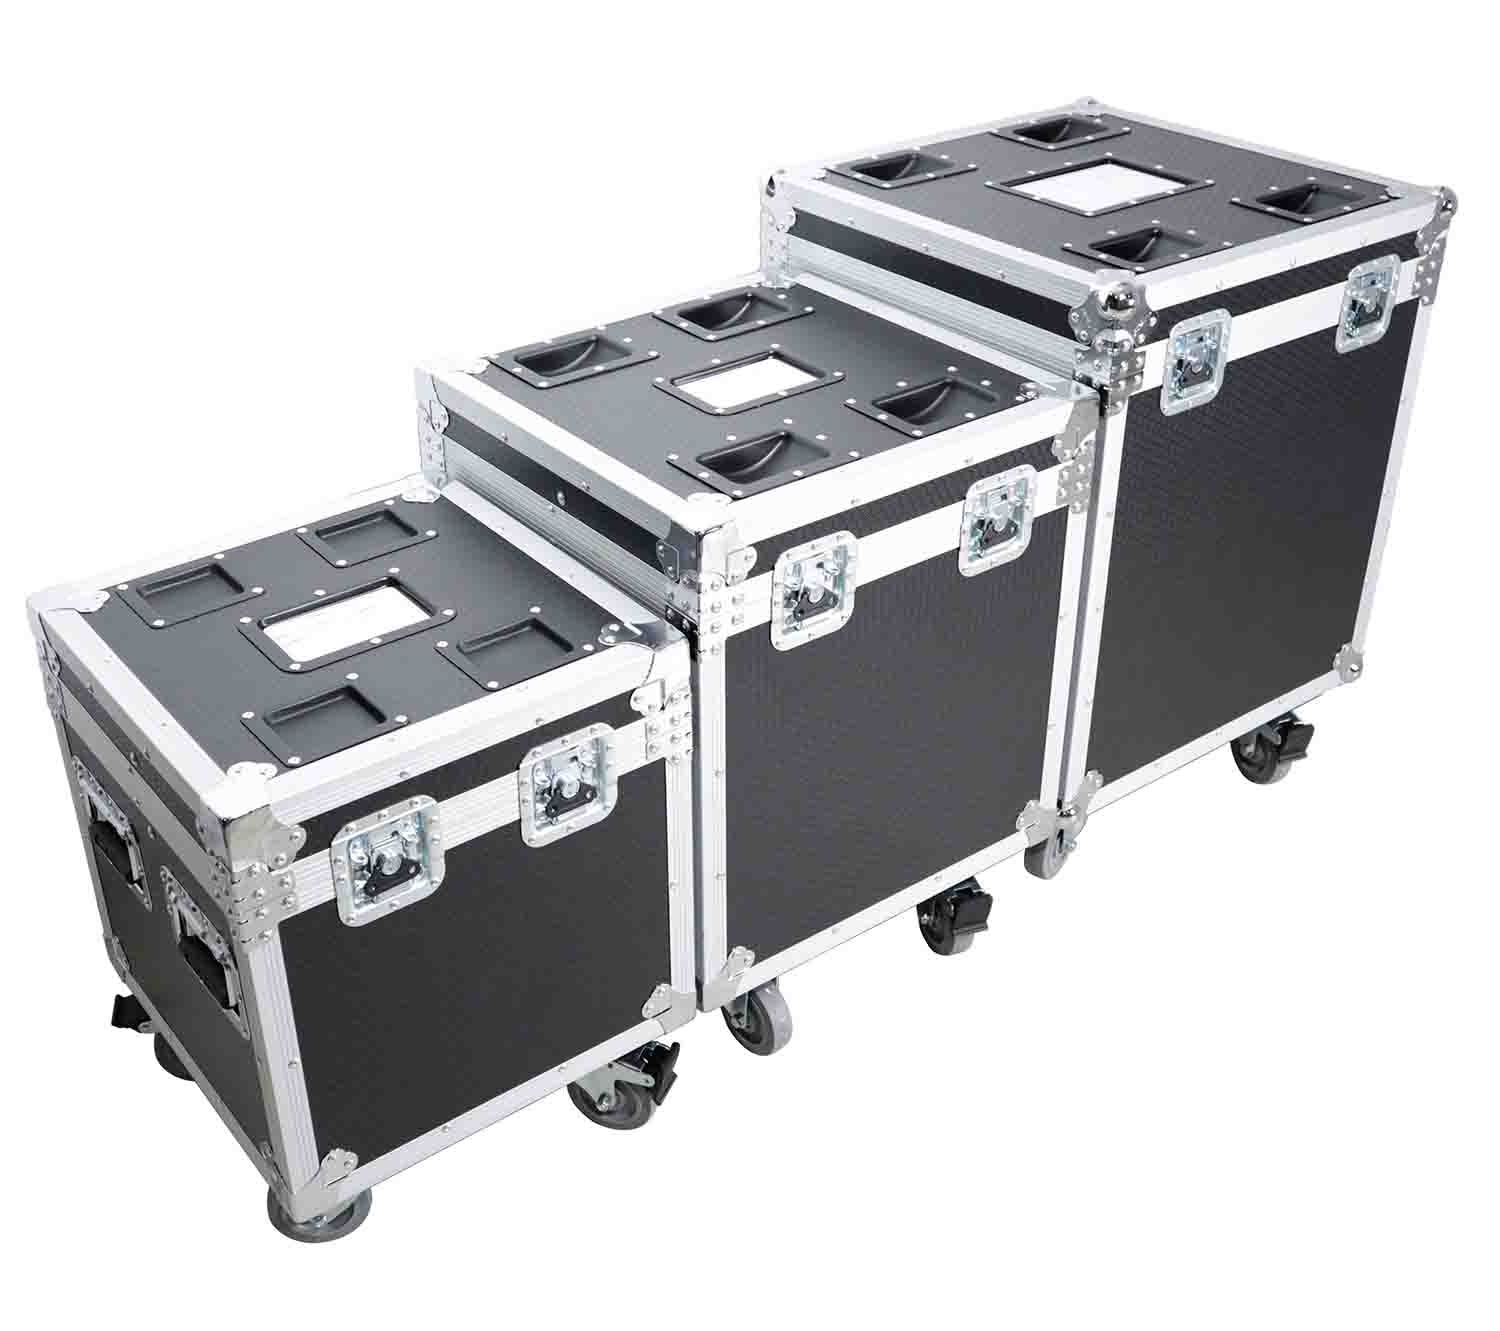 B-Stock: ProX XS-UTL49 PKG3, ATA Style Road Cases Large, Medium and Small Size with Wheels - Package of 3 - Hollywood DJ